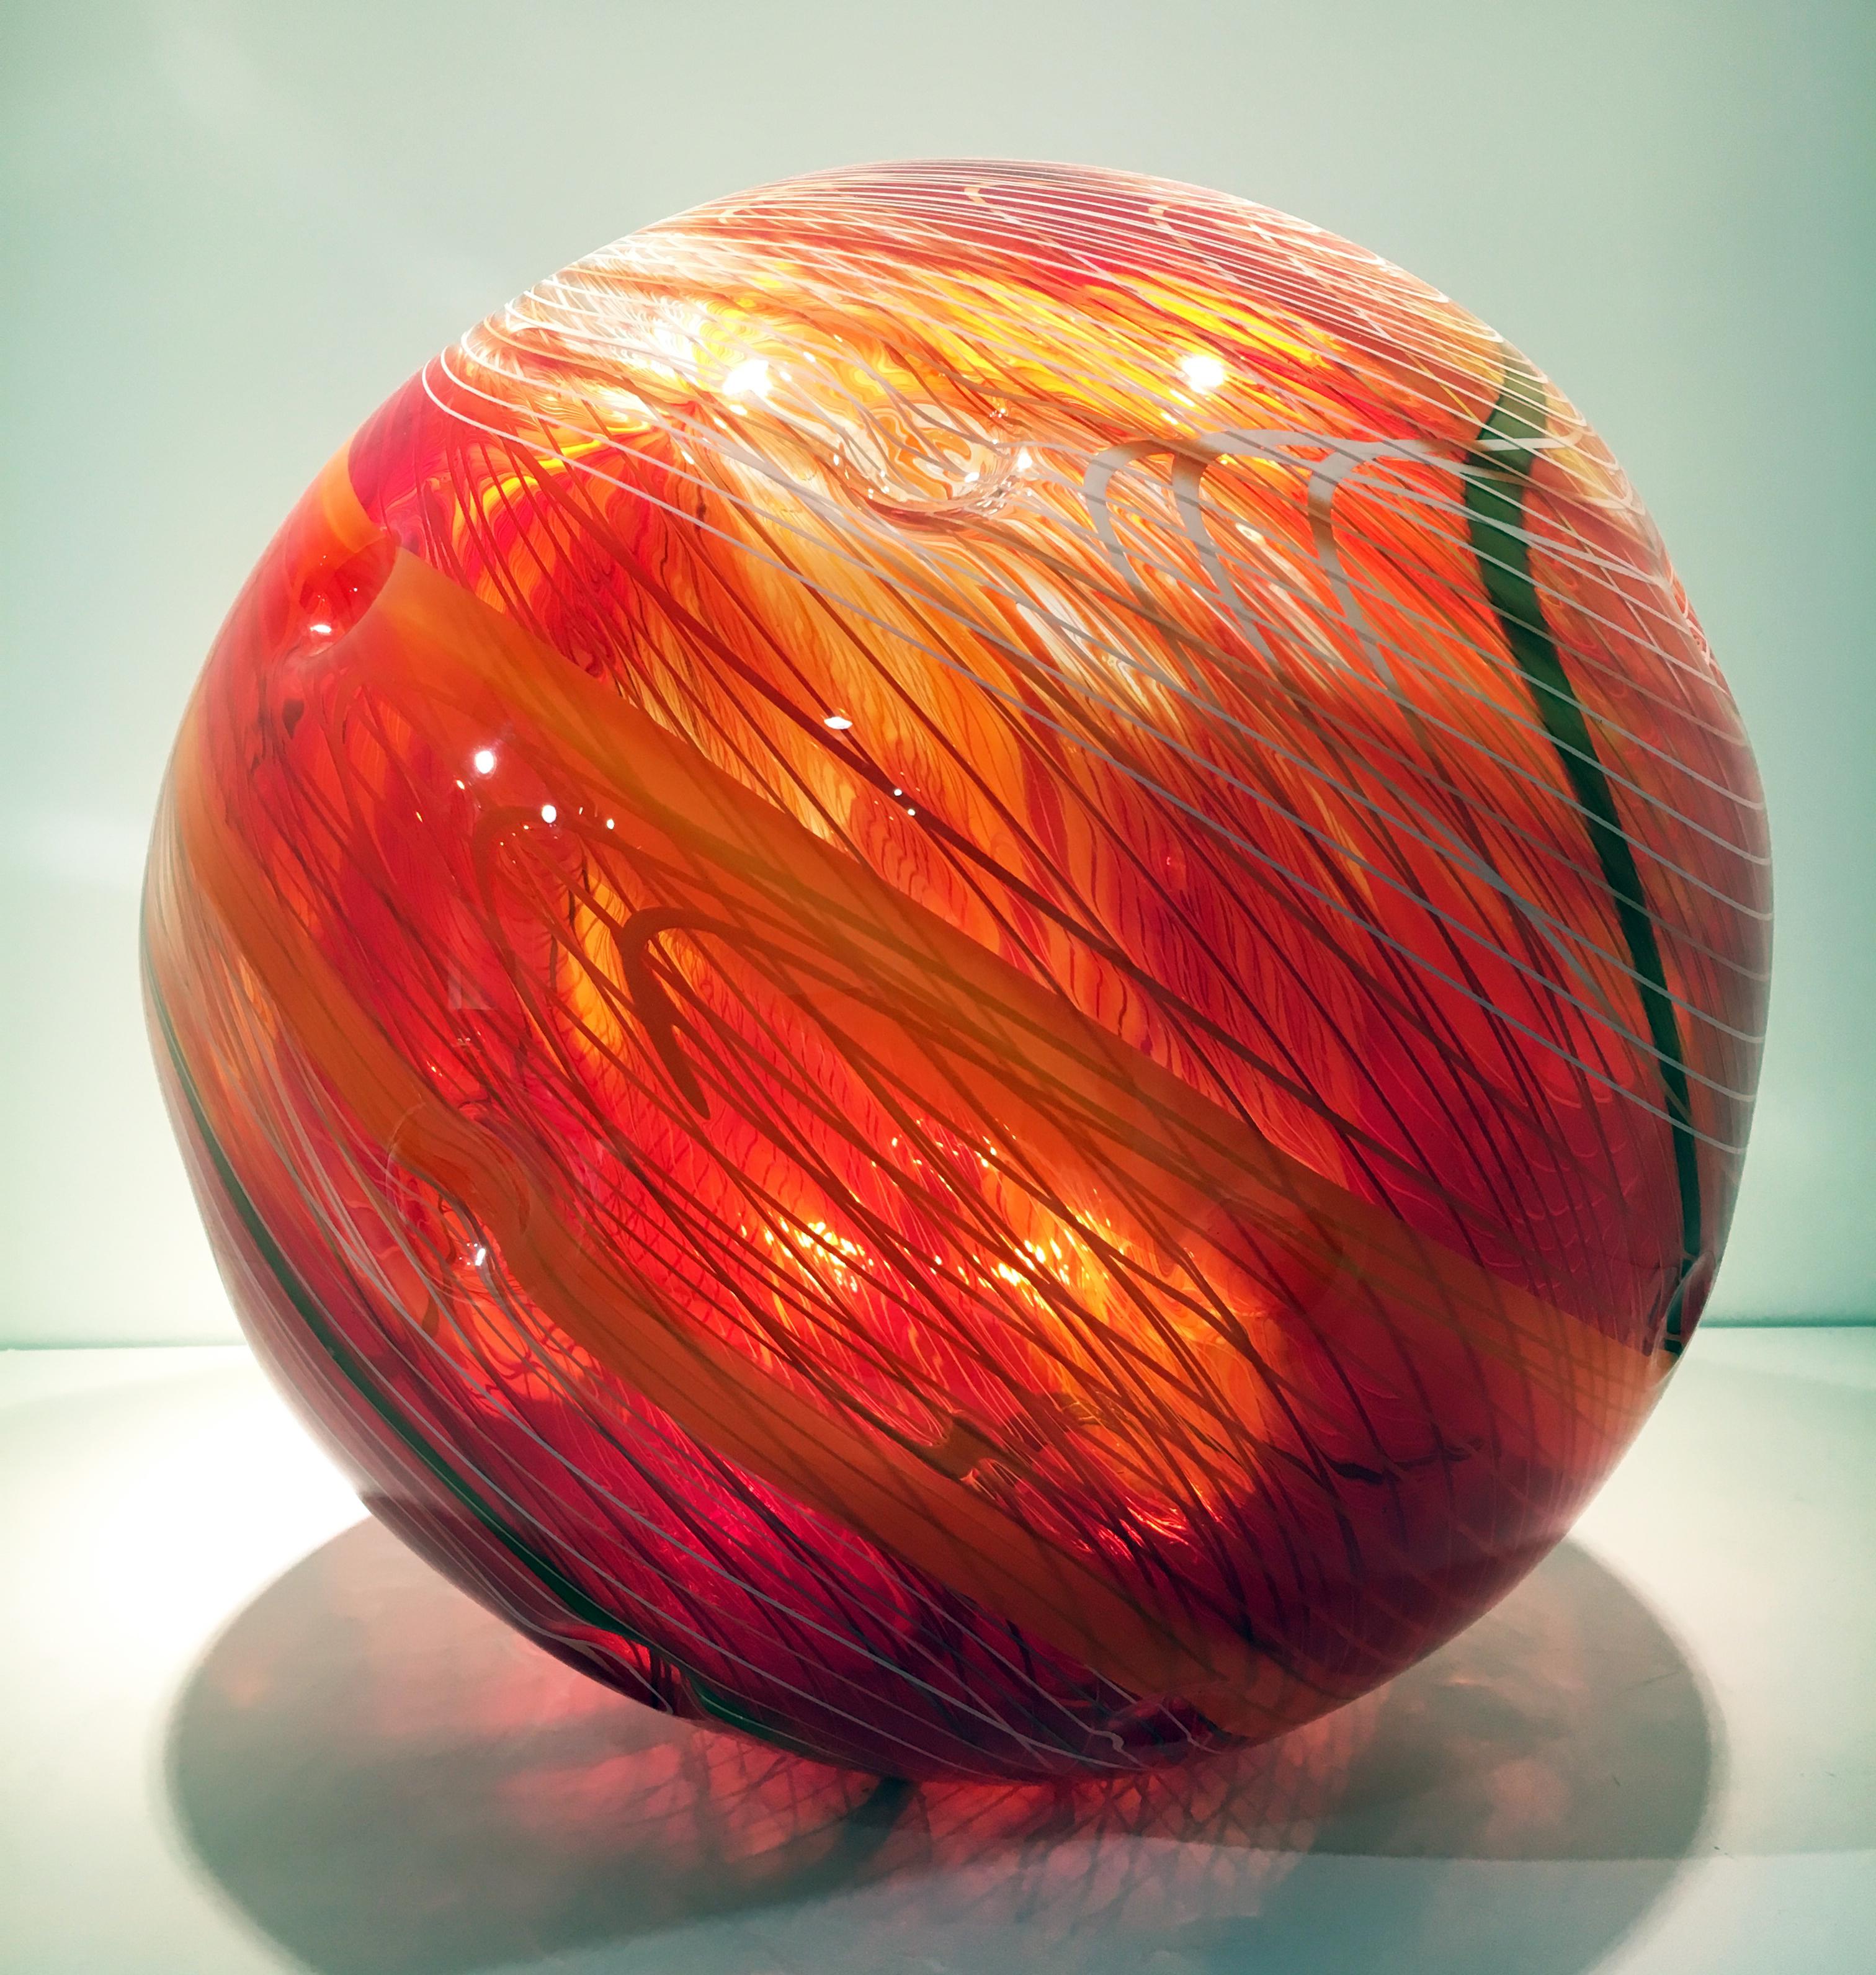 Nancy Callan’s artistic voice as a glass sculptor reflects her high-level training and talents. Since attending the Massachusetts College of Art (BFA 1996), Callan has received numerous awards including the Creative Glass Center of America